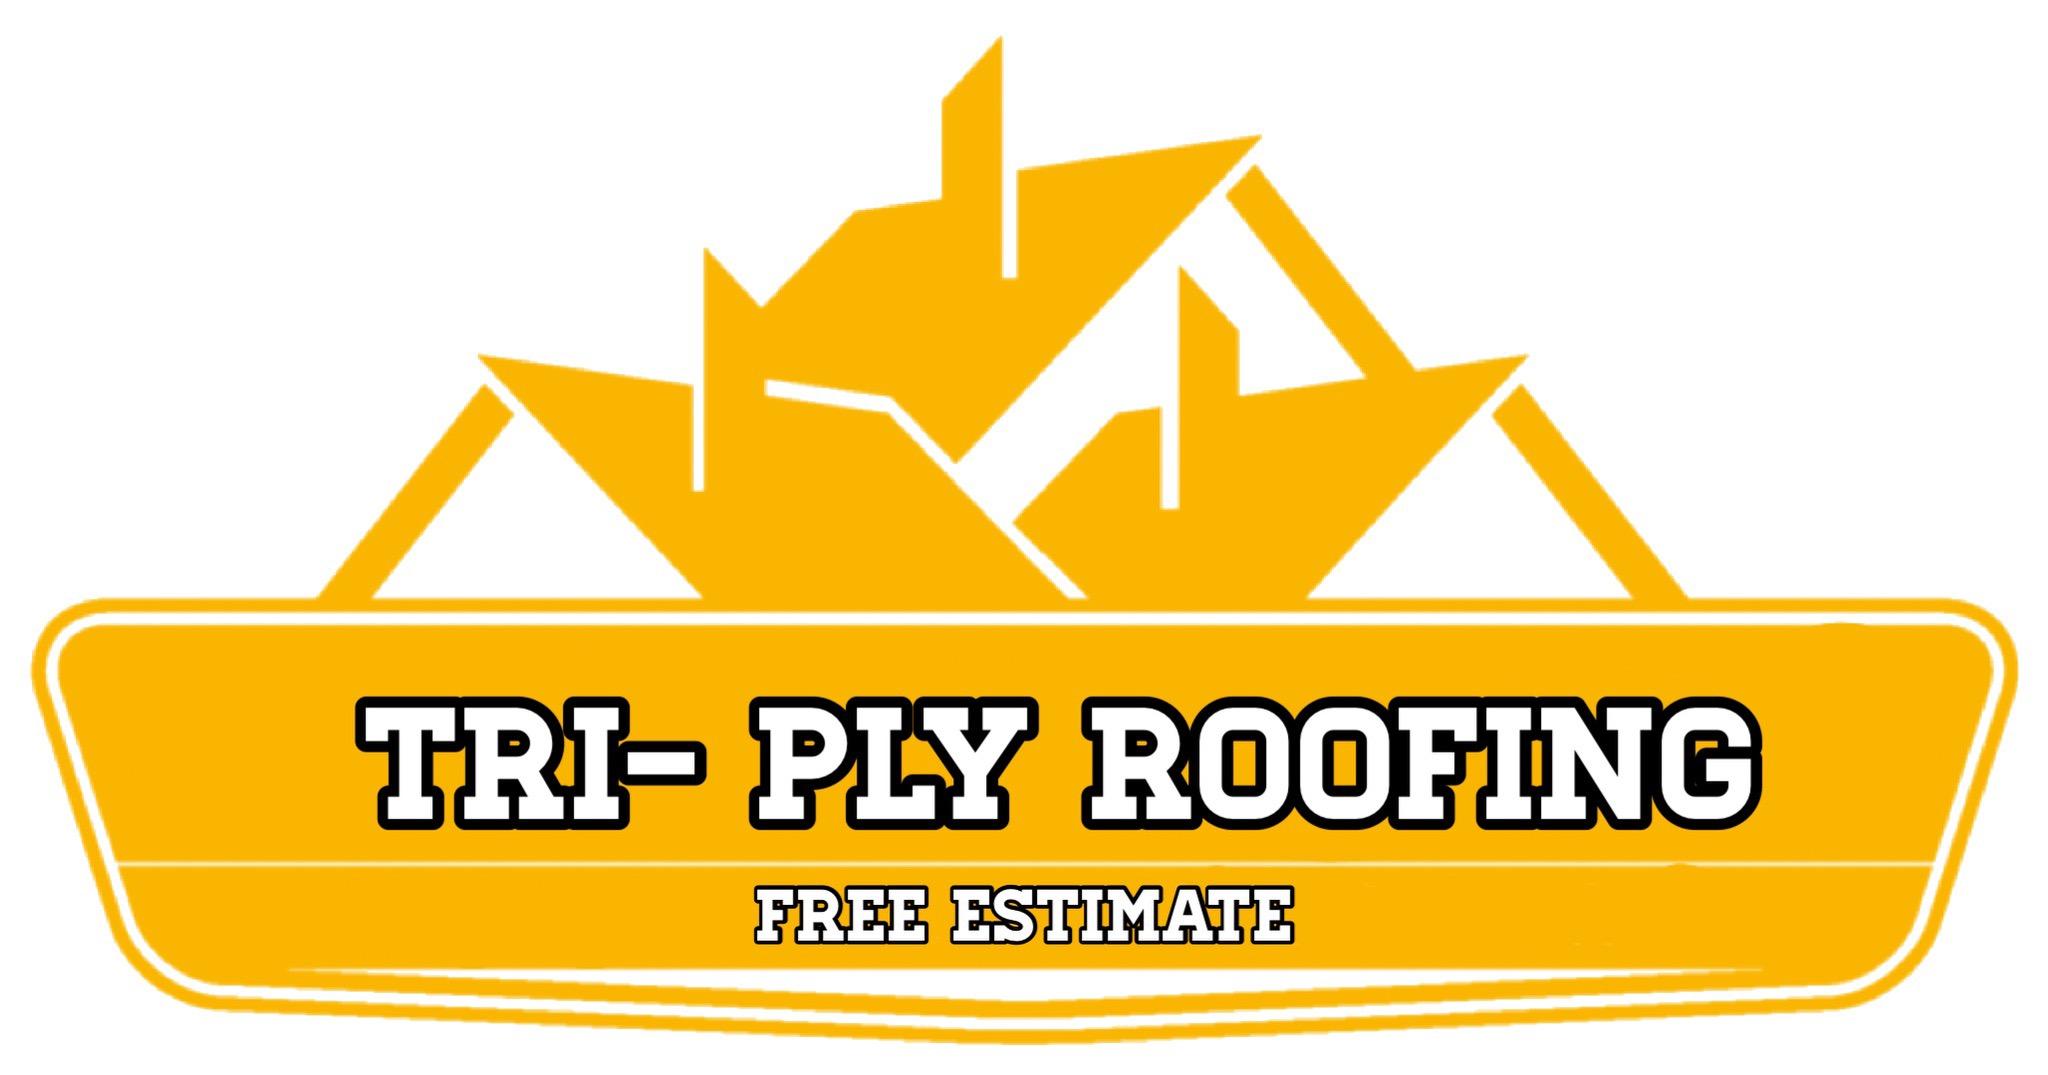 Tri Ply Roofing Services Logo